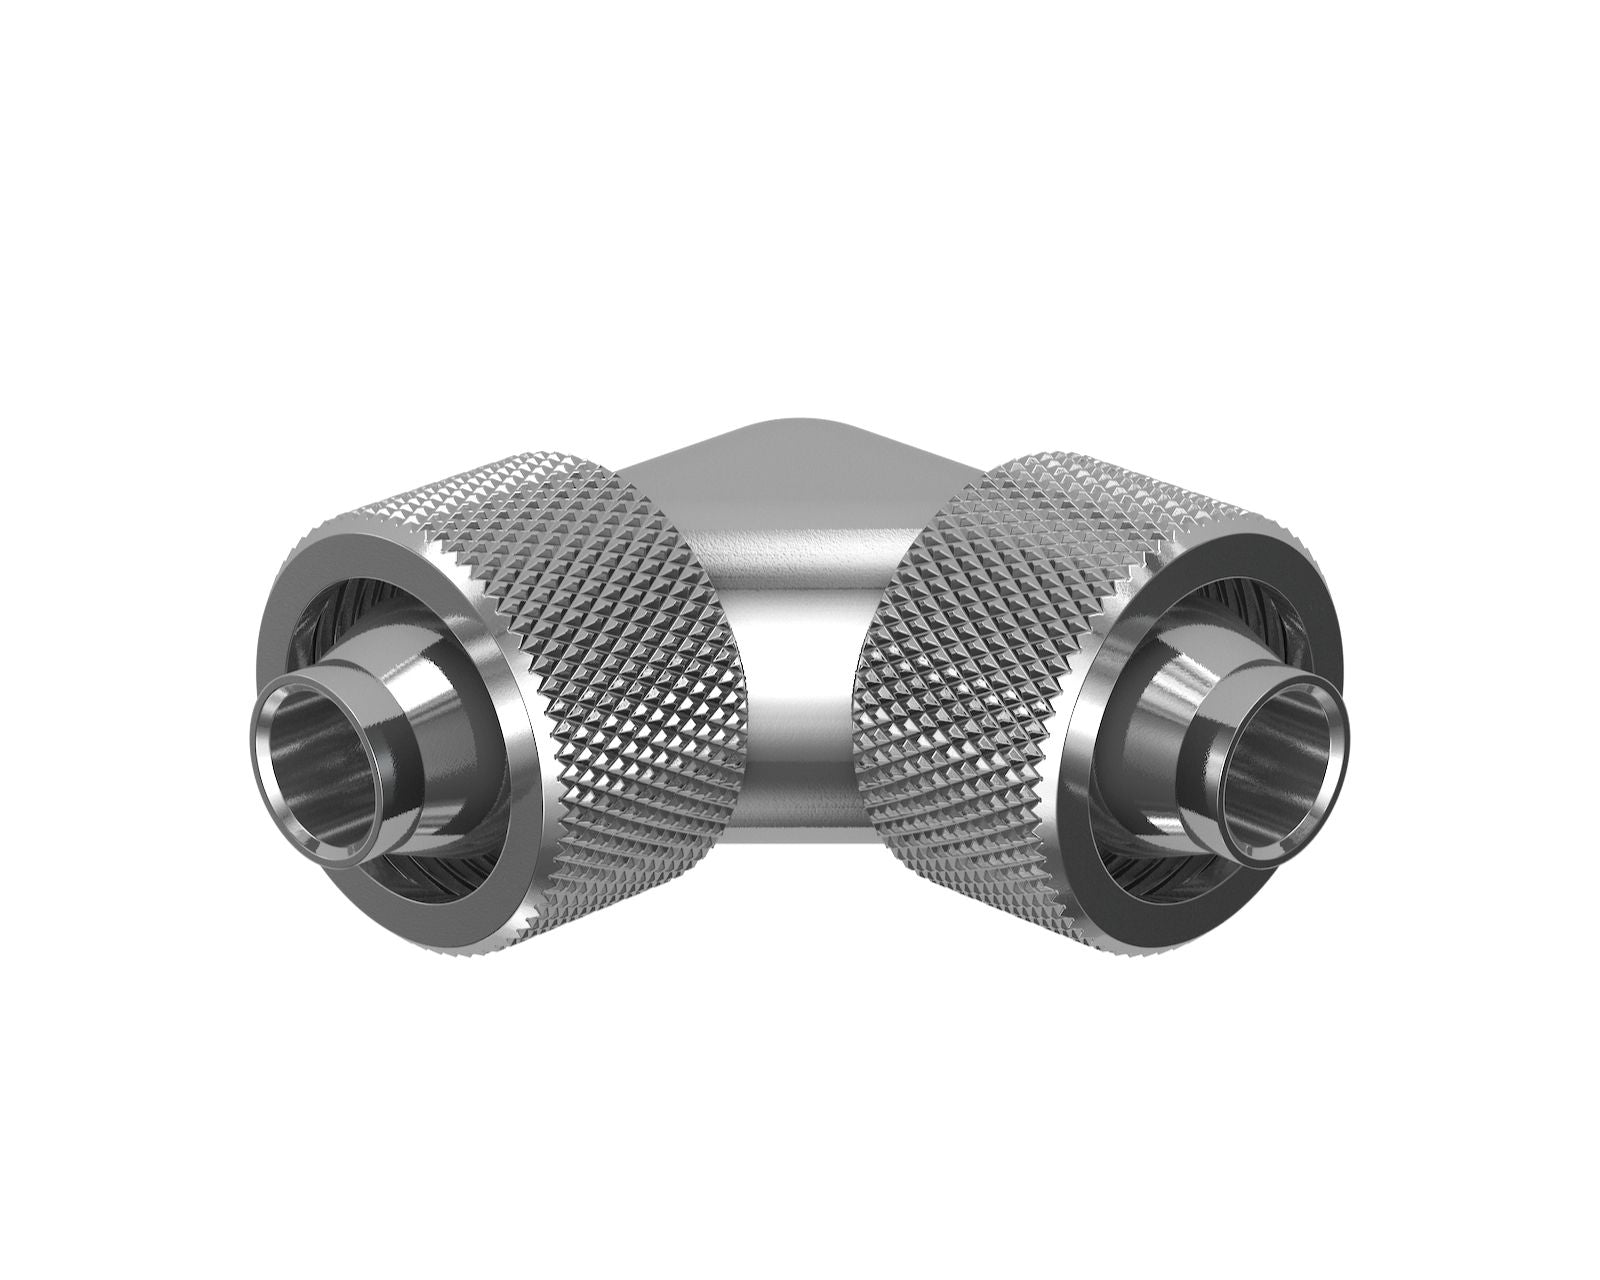 PrimoChill SecureFit SX - Premium 90 Degree Compression Fitting Set For 3/8in ID x 5/8in OD Flexible Tubing (F-SFSX5890) - Available in 20+ Colors, Custom Watercooling Loop Ready - Silver Nickel